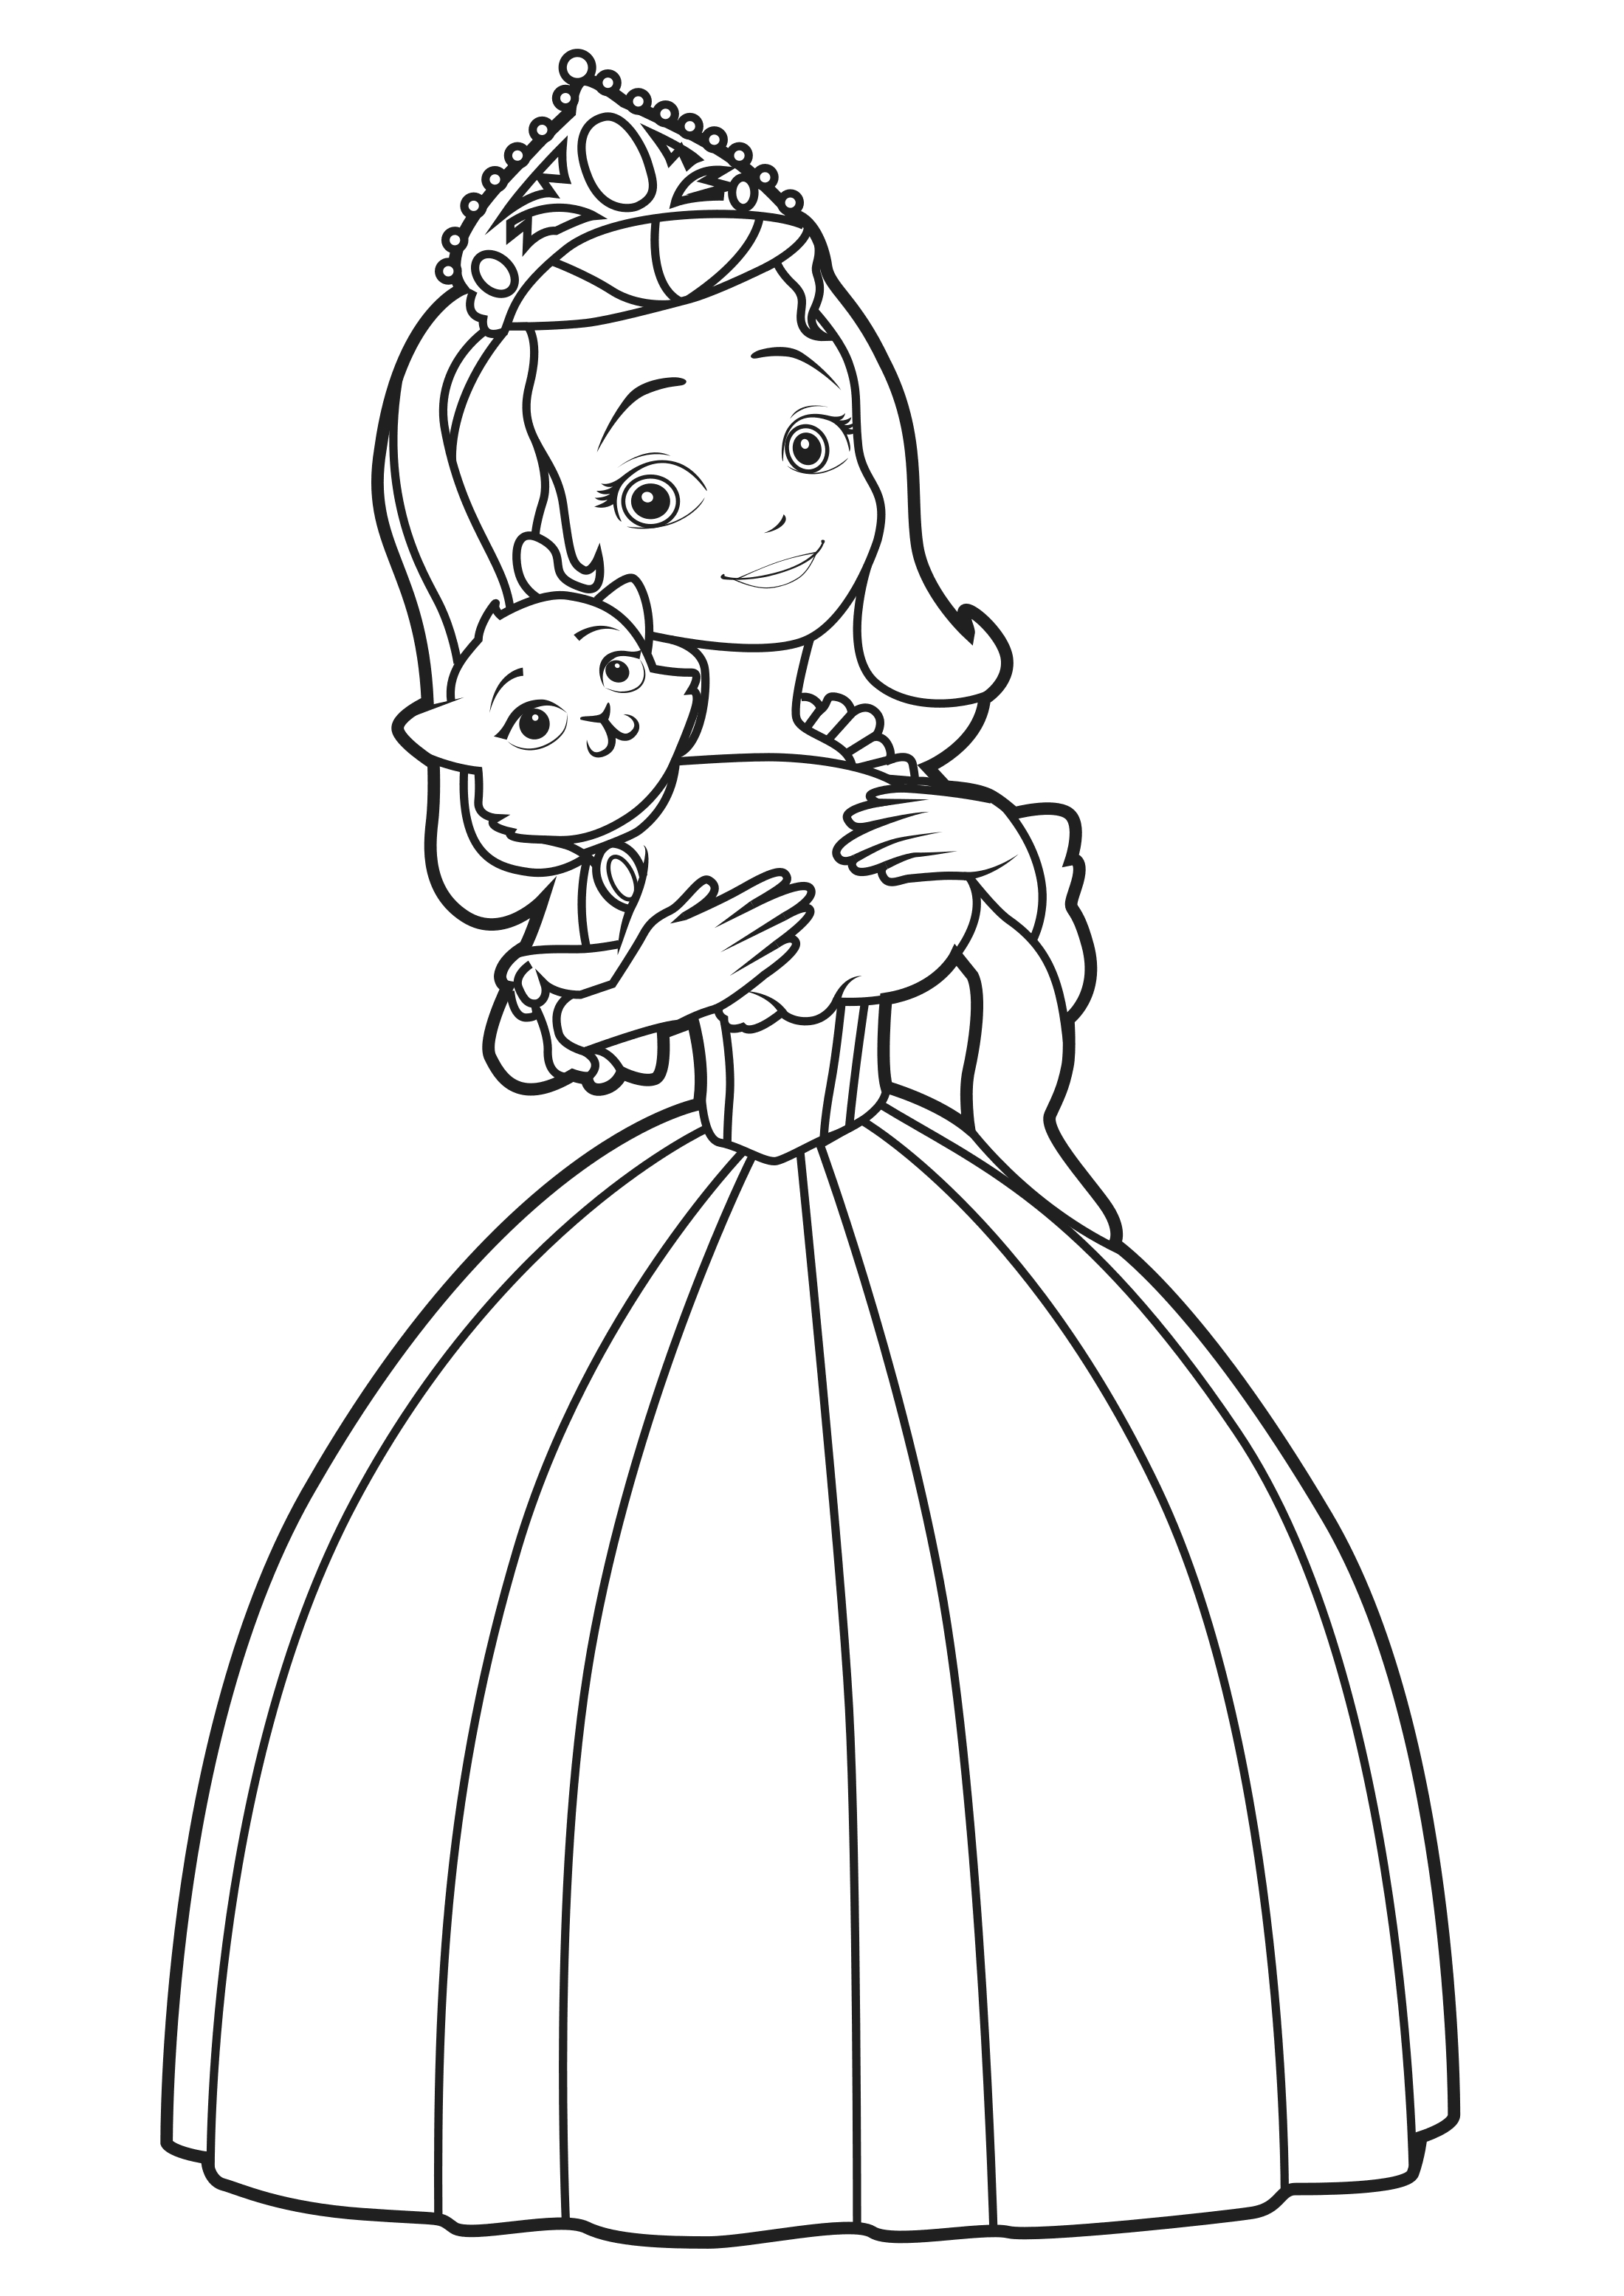 Coloring page Sofia the First The princess and her cat